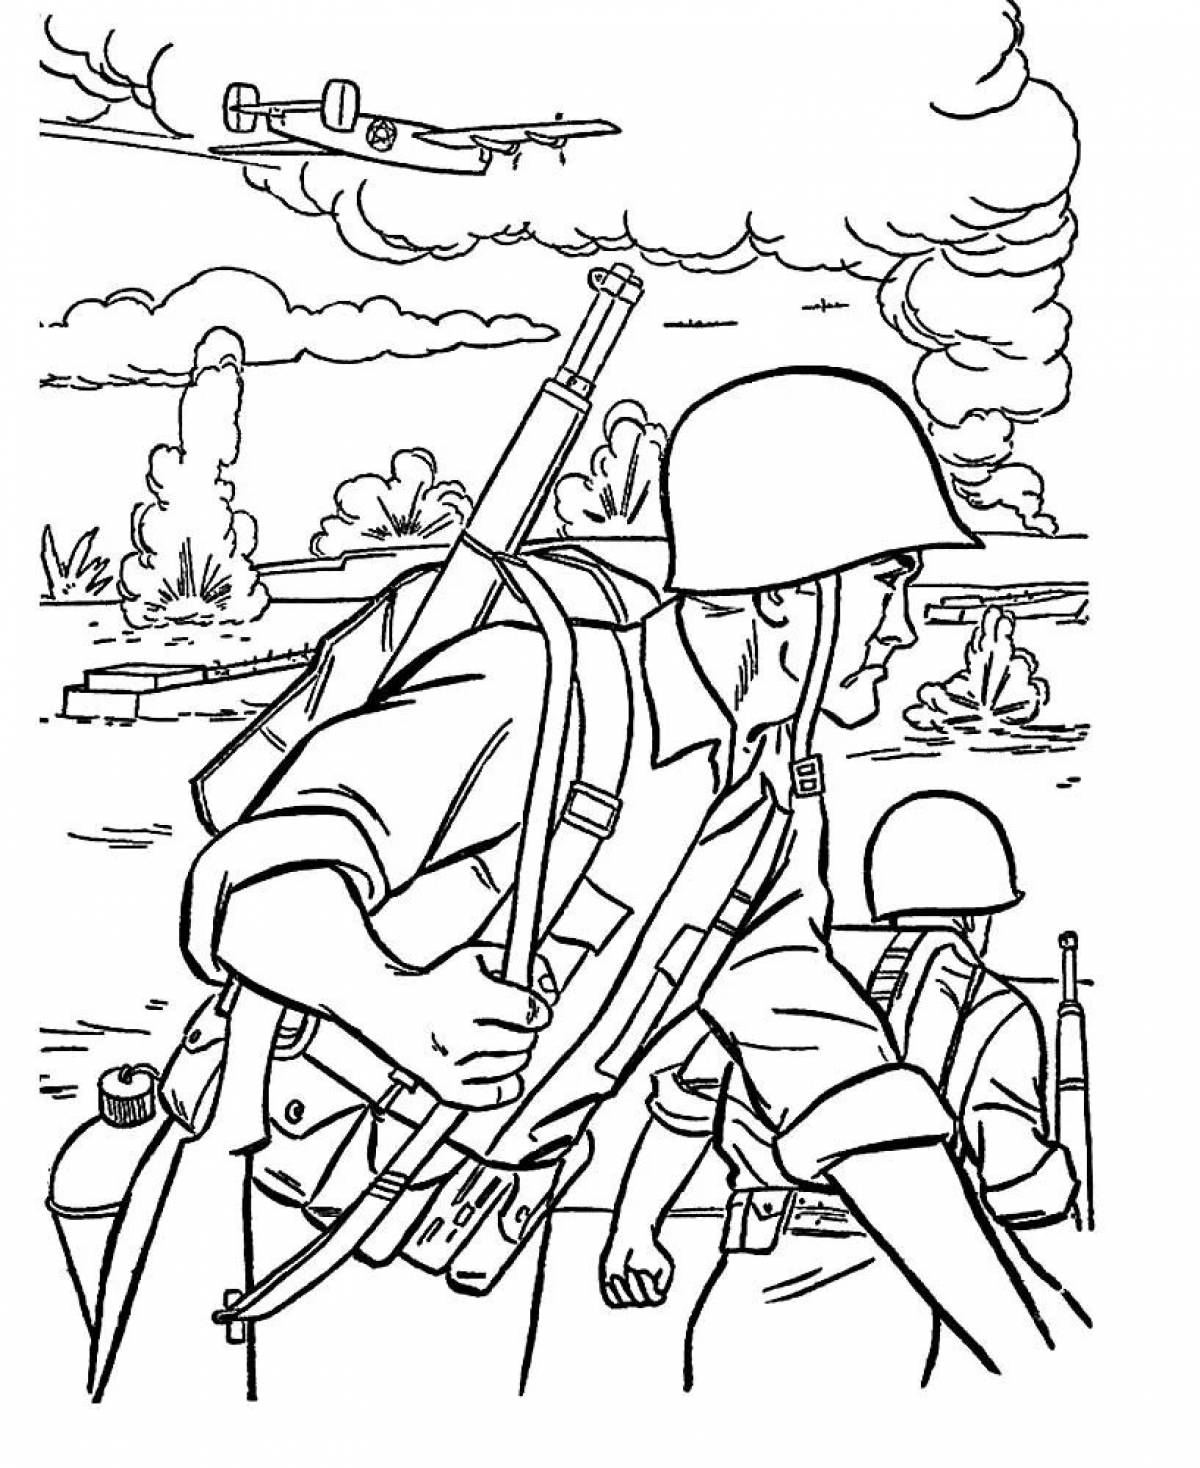 Zany war coloring book for kids